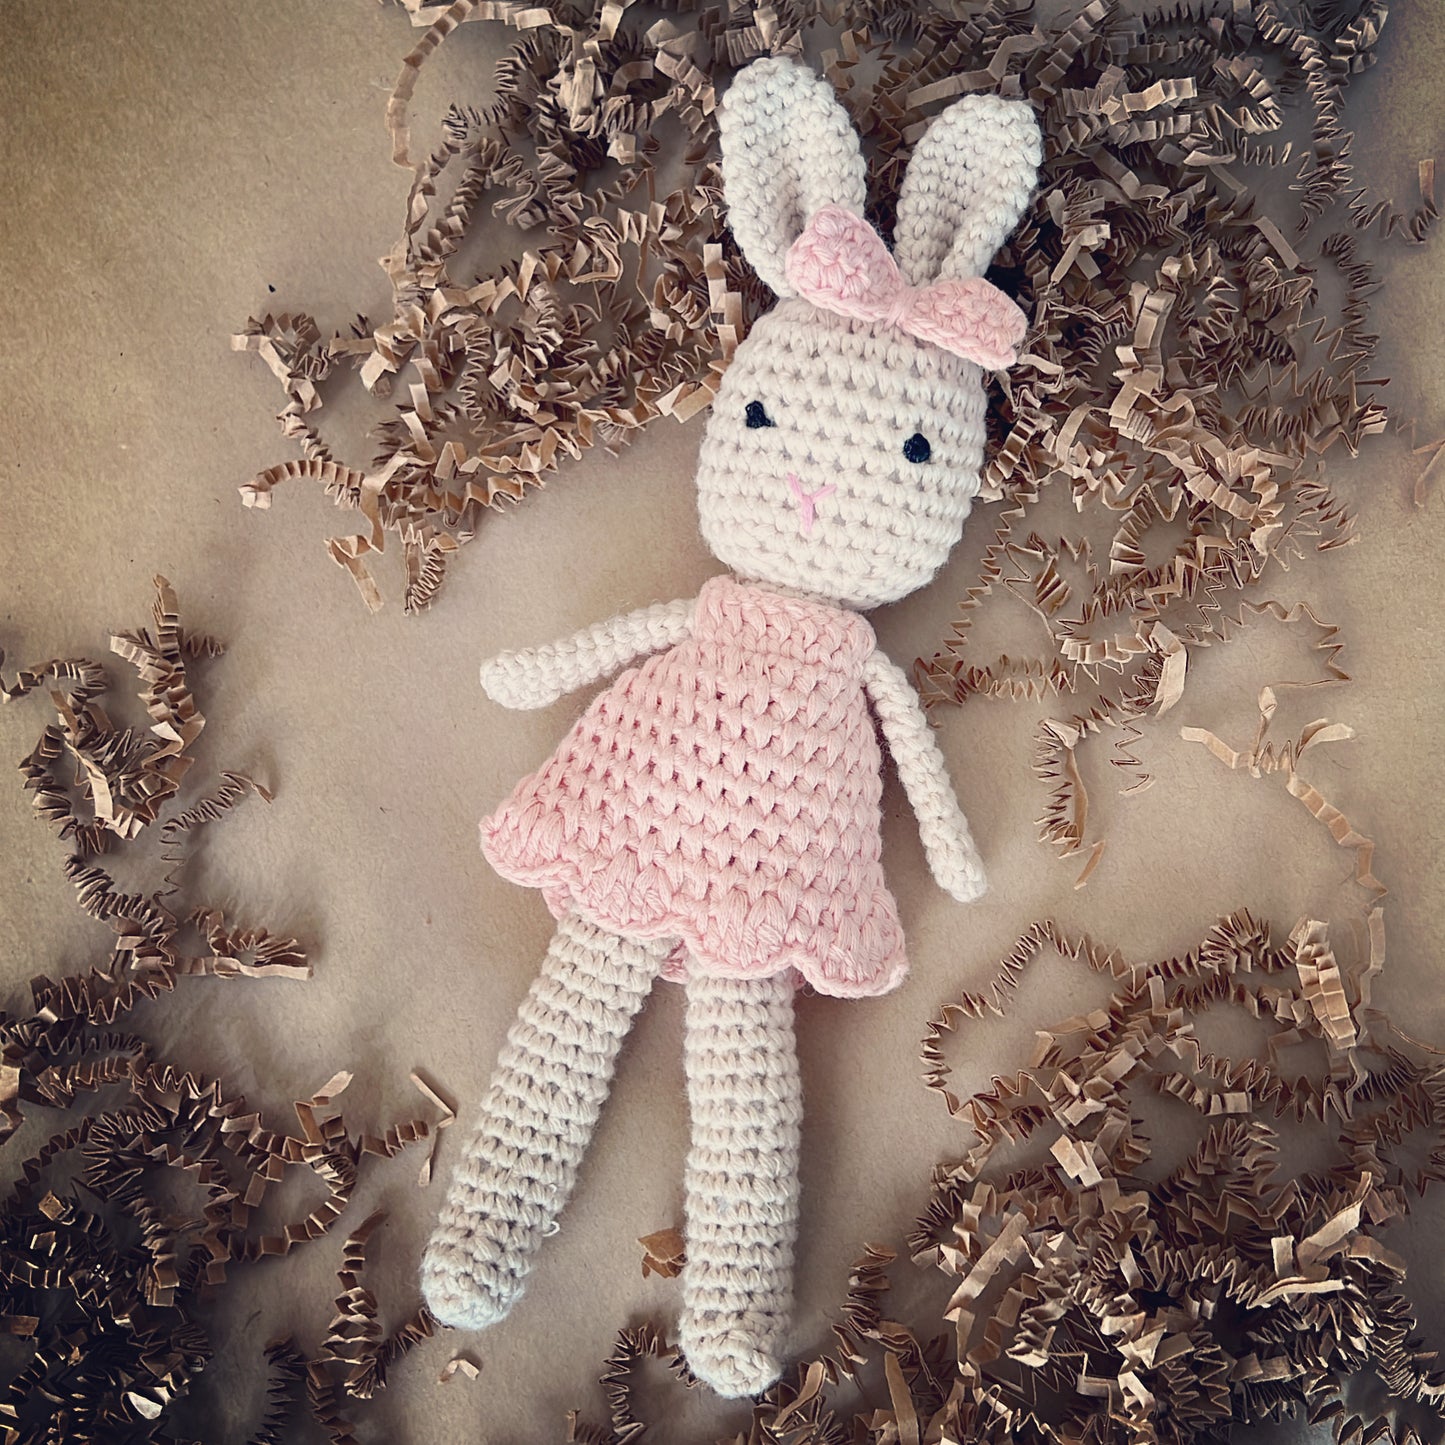 Crochet handmade bunny doll dressed in a crochet pink dress and a matching pink crochet bow, made with organic cotton yarn. This cute crochet bunny is the cutest addition to a baby shower gift, a memorable newborn gift for years to keep